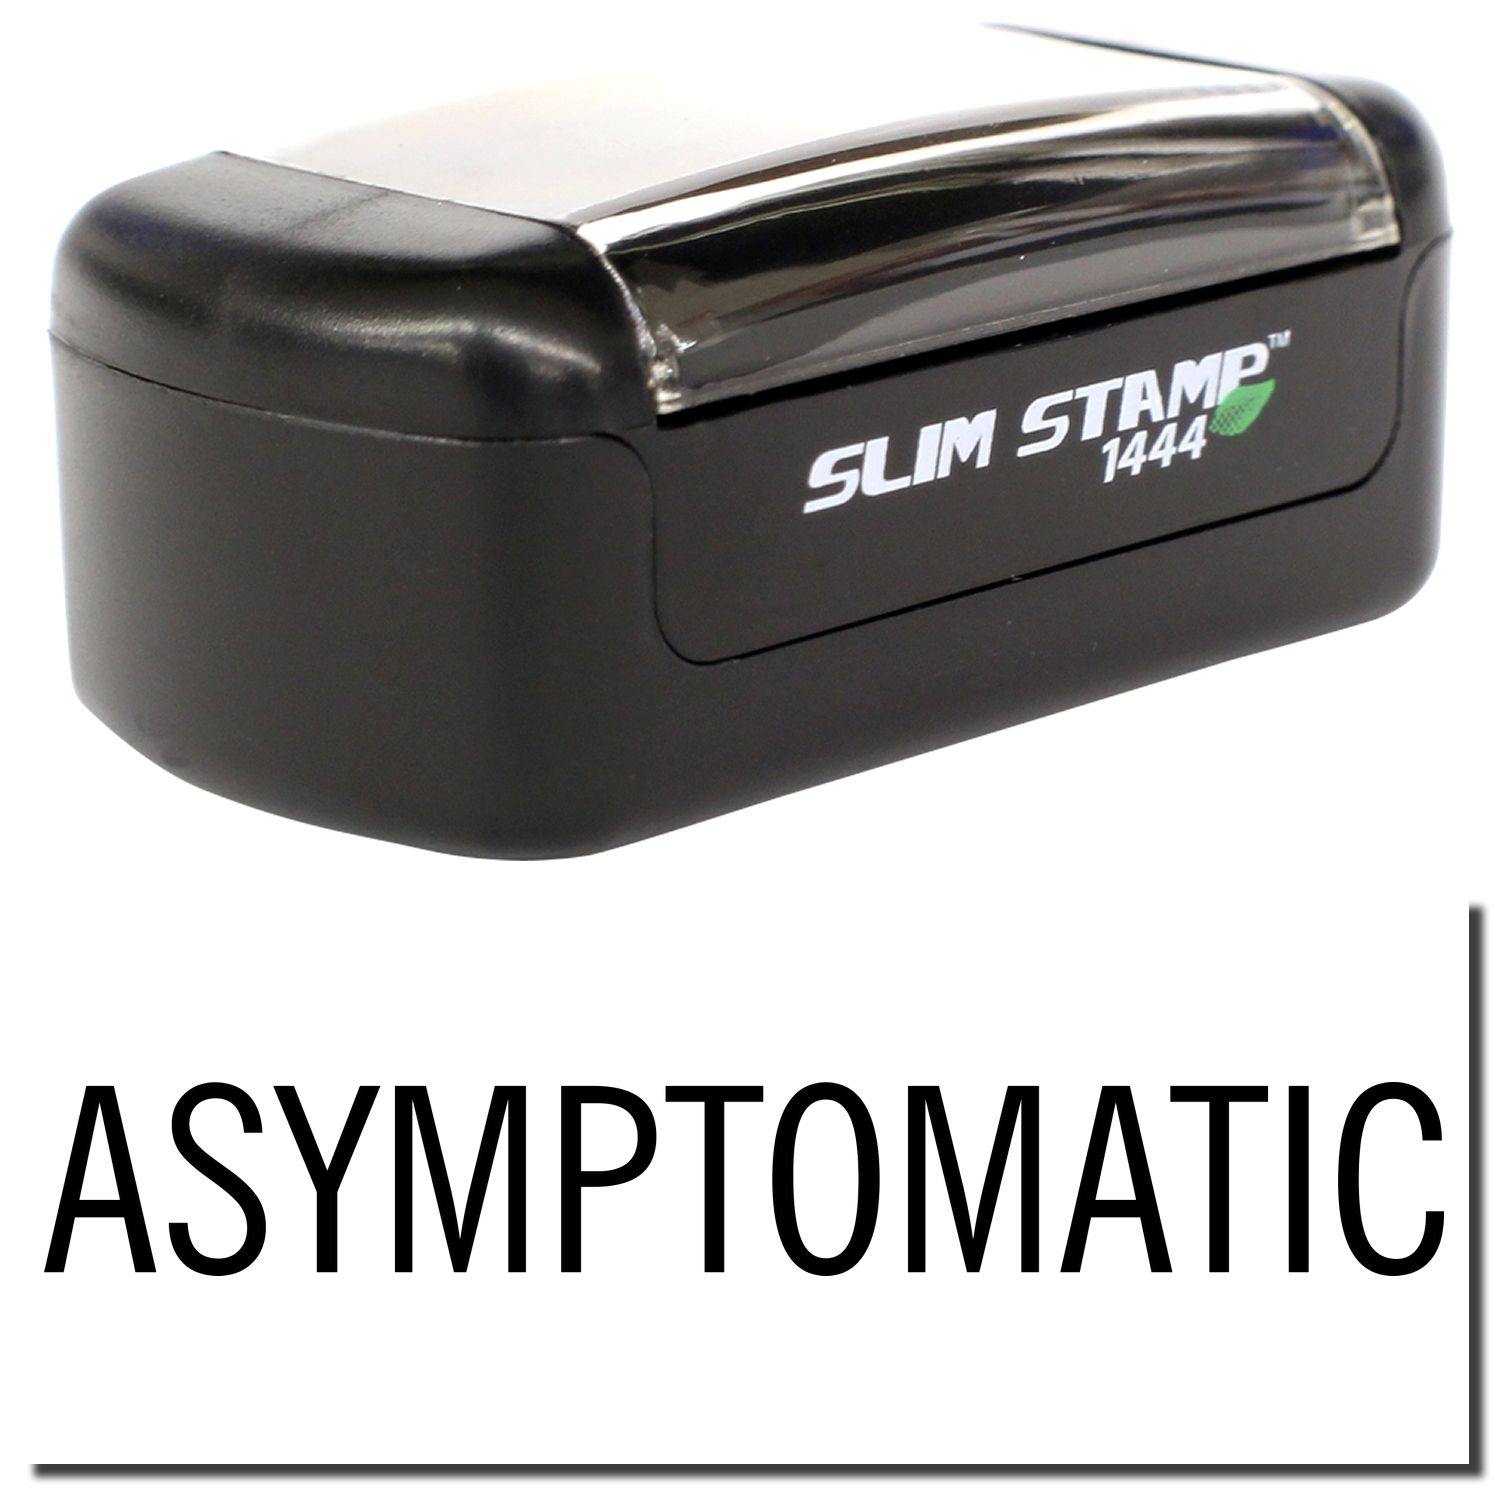 A stock office pre-inked stamp with a stamped image showing how the text "ASYMPTOMATIC" is displayed after stamping.